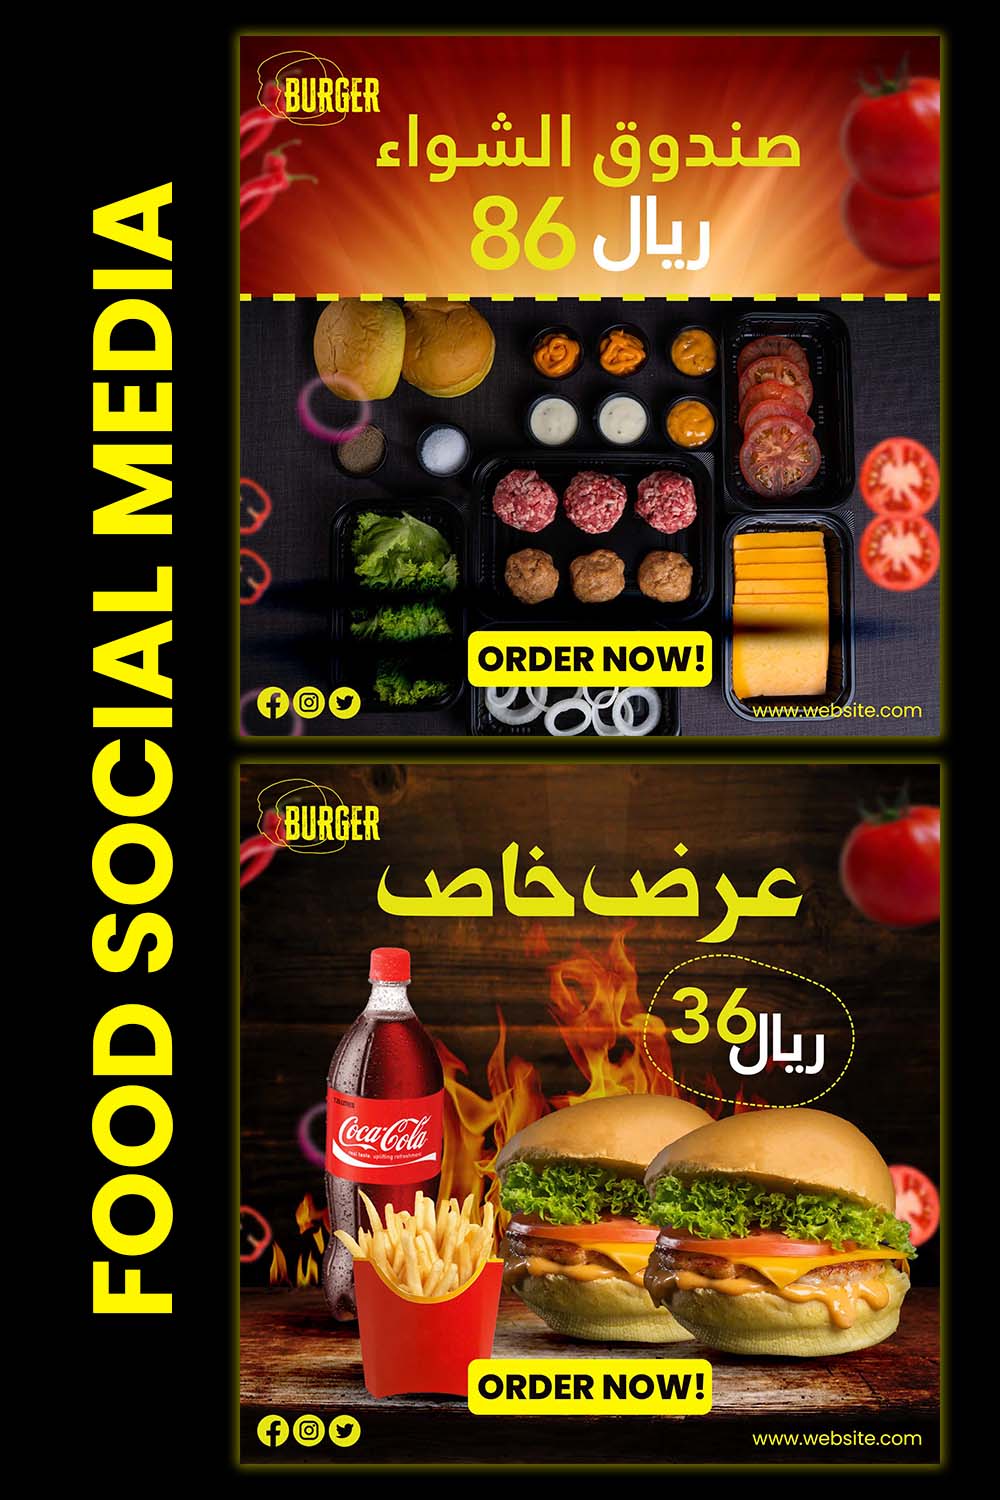 Food Social Media Campaign pinterest preview image.